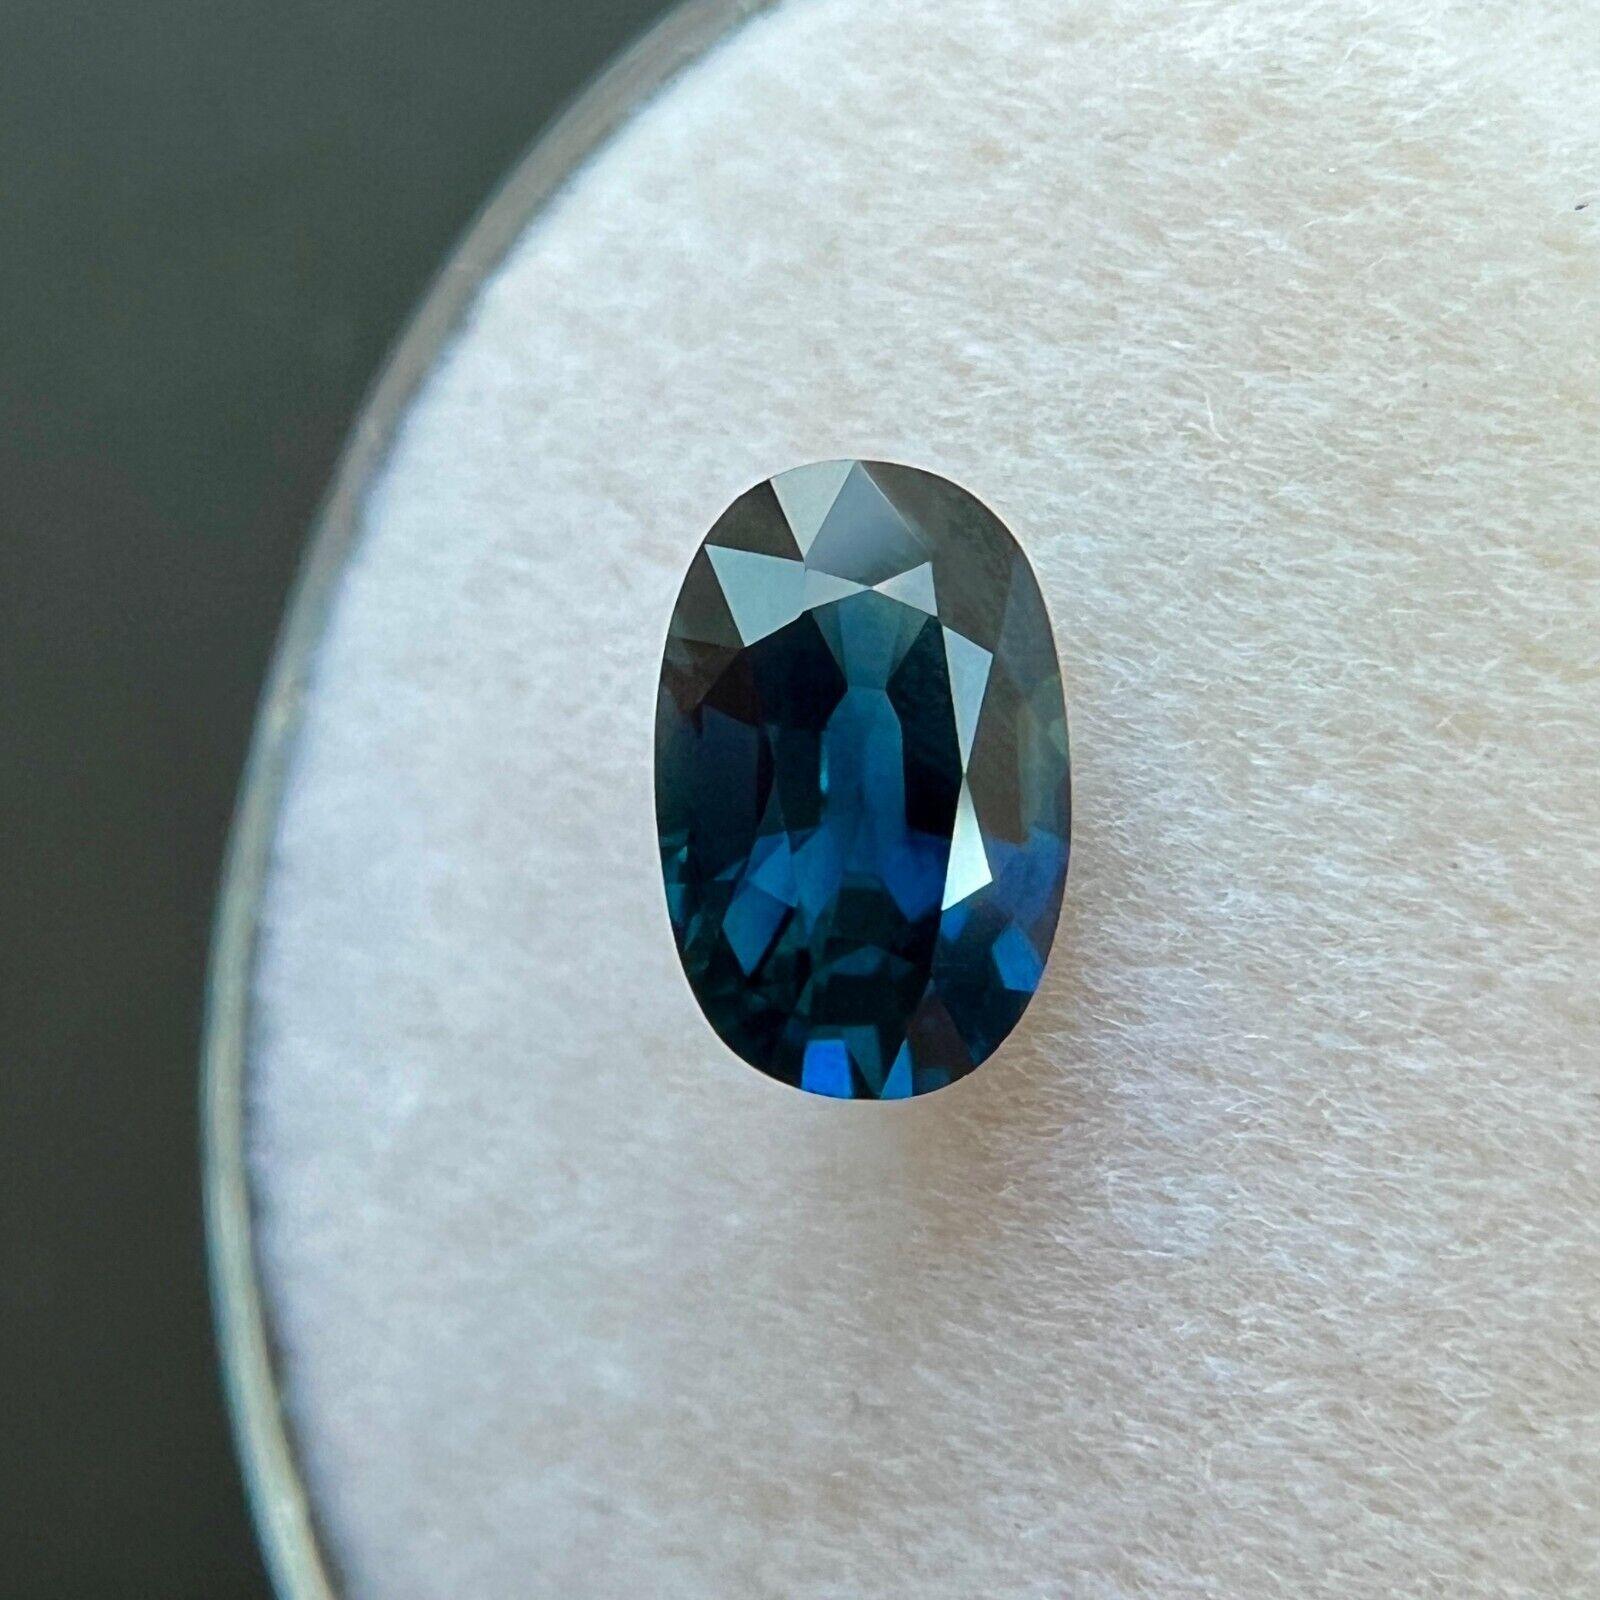 Natural Deep Blue Sapphire 1.14ct GIA Certified 7.5X4.9mm Oval Cut Gemstone

GIA Certified Deep Blue Sapphire Gemstone.
1.14 Carat sapphire with a beautiful deep blue colour and excellent clarity, a very clean stone. VS.
This sapphire also has an